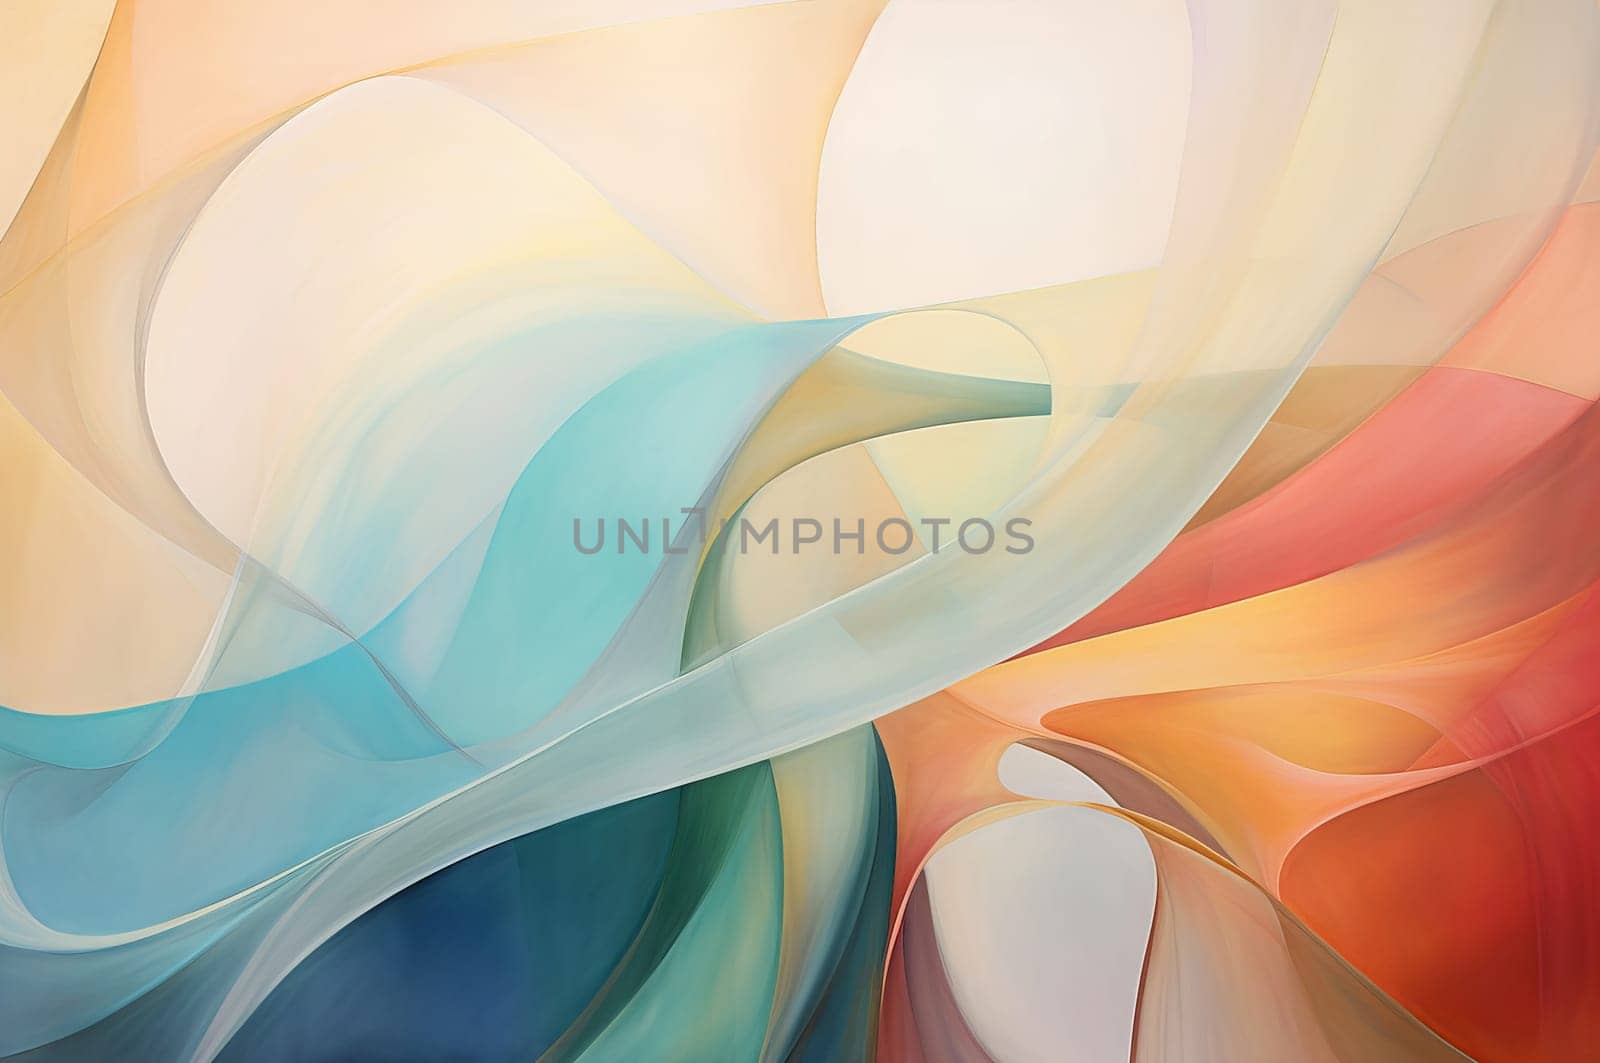 Elegant digital art with smooth swirling patterns in warm and cool tones by ylivdesign